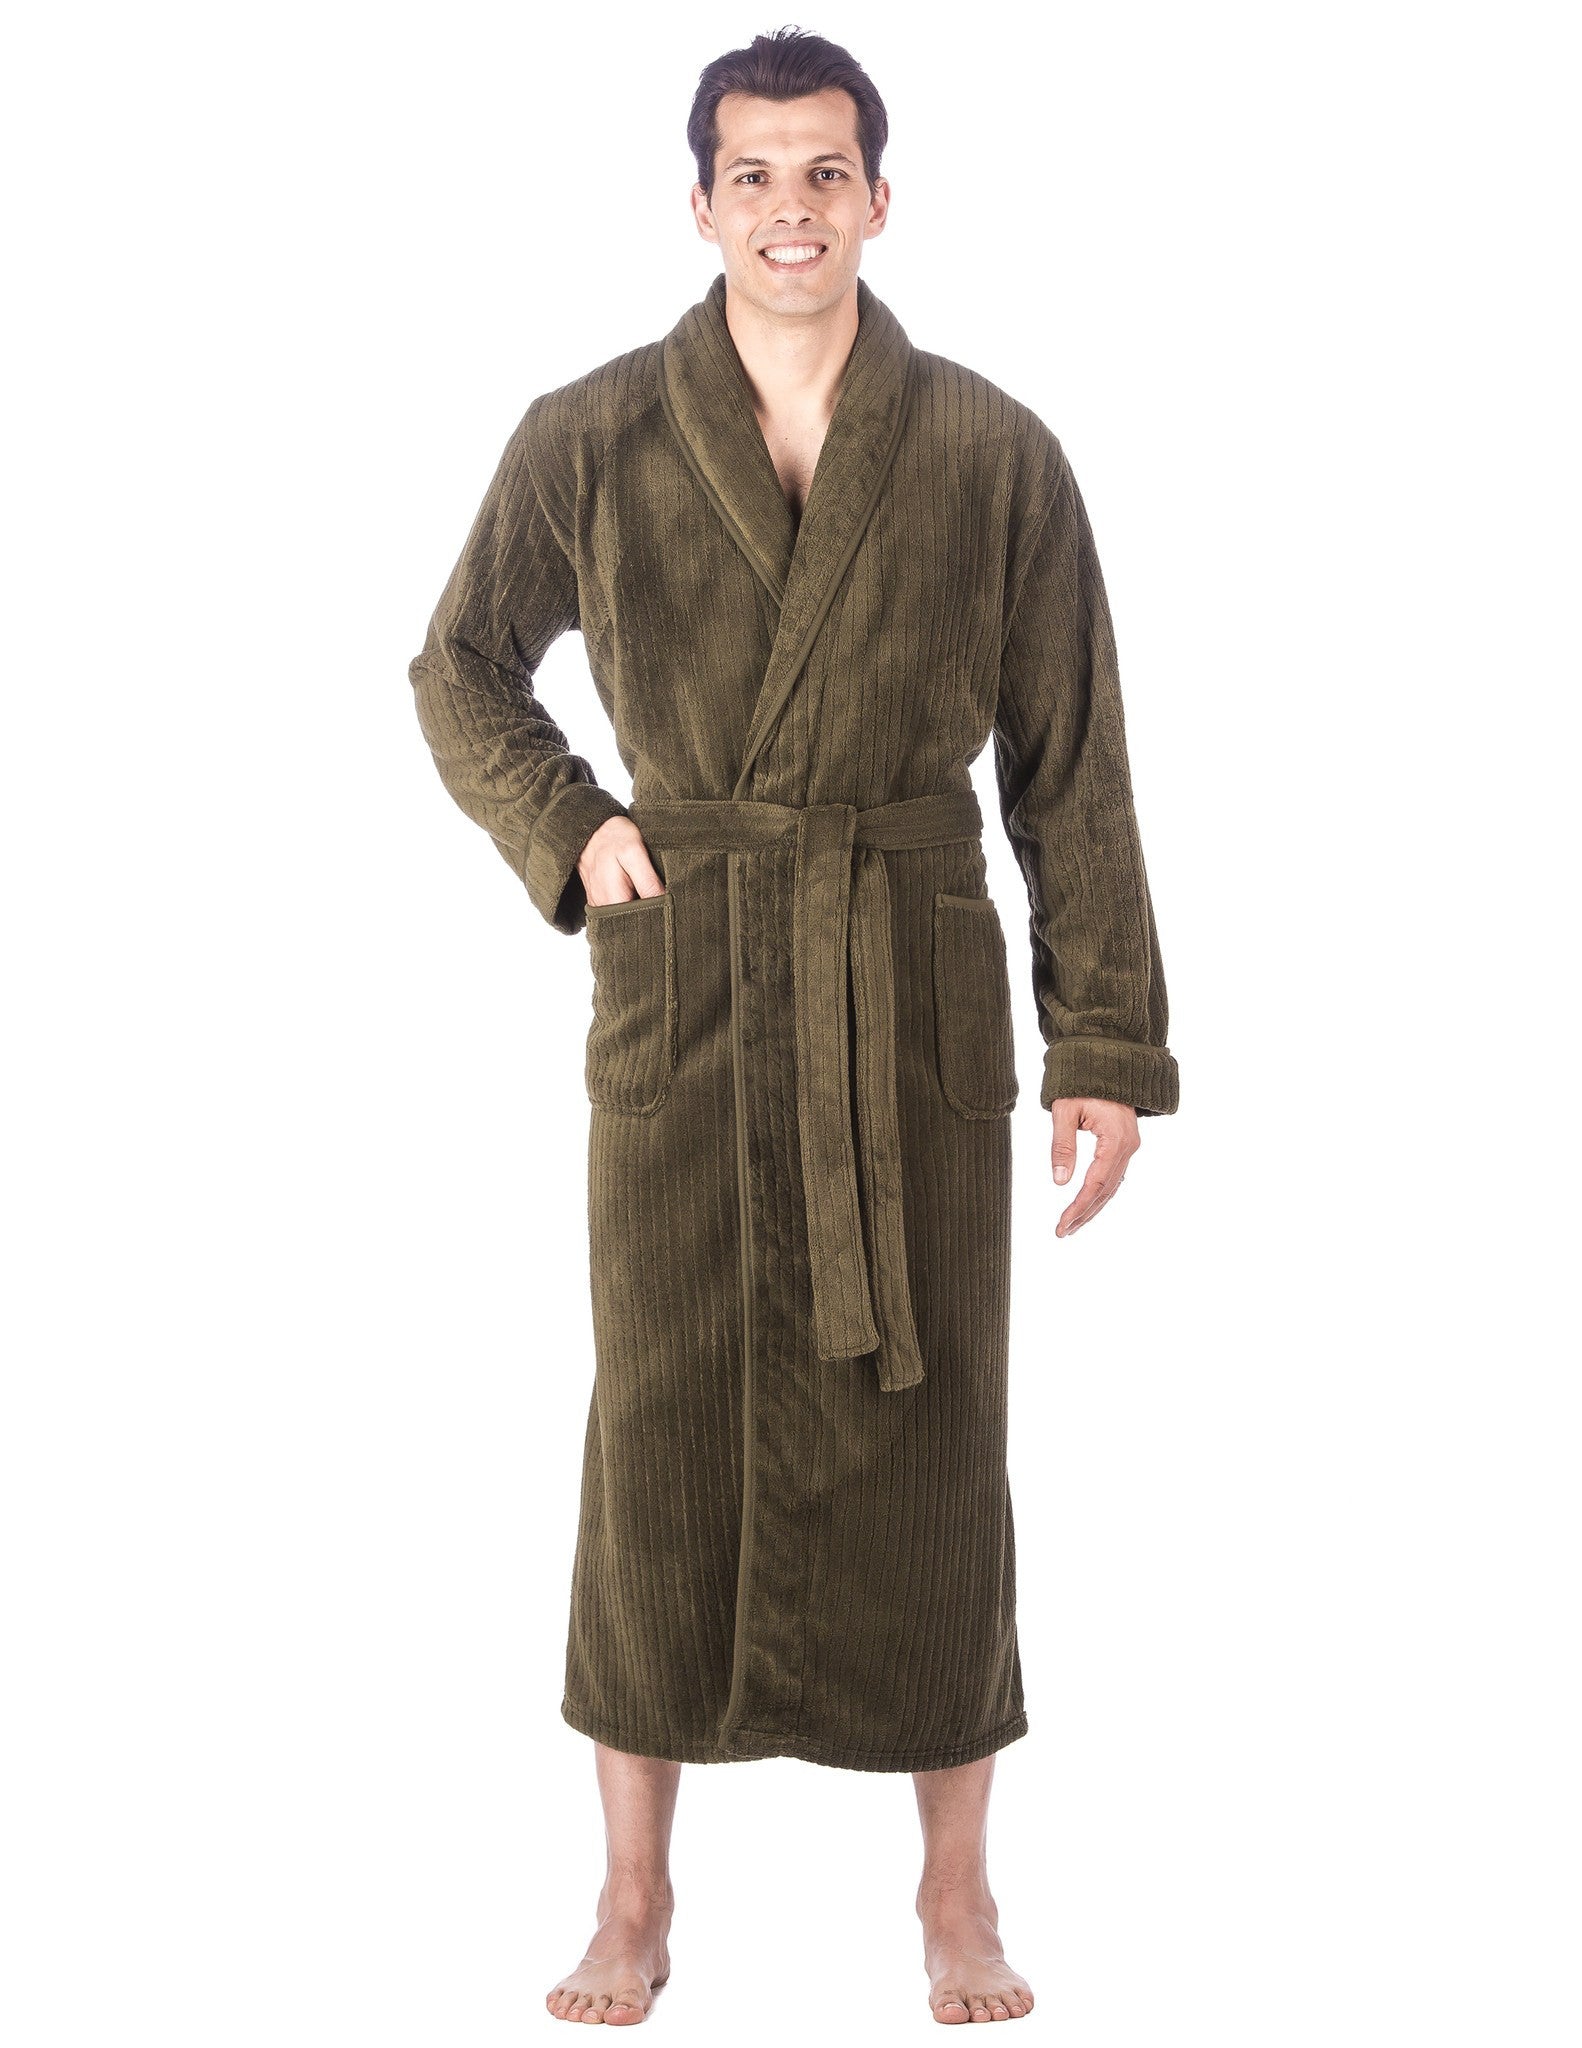 Brown and tan and blue Bathrobe-BH RB 6525-Chest 46 – Costume Cottage